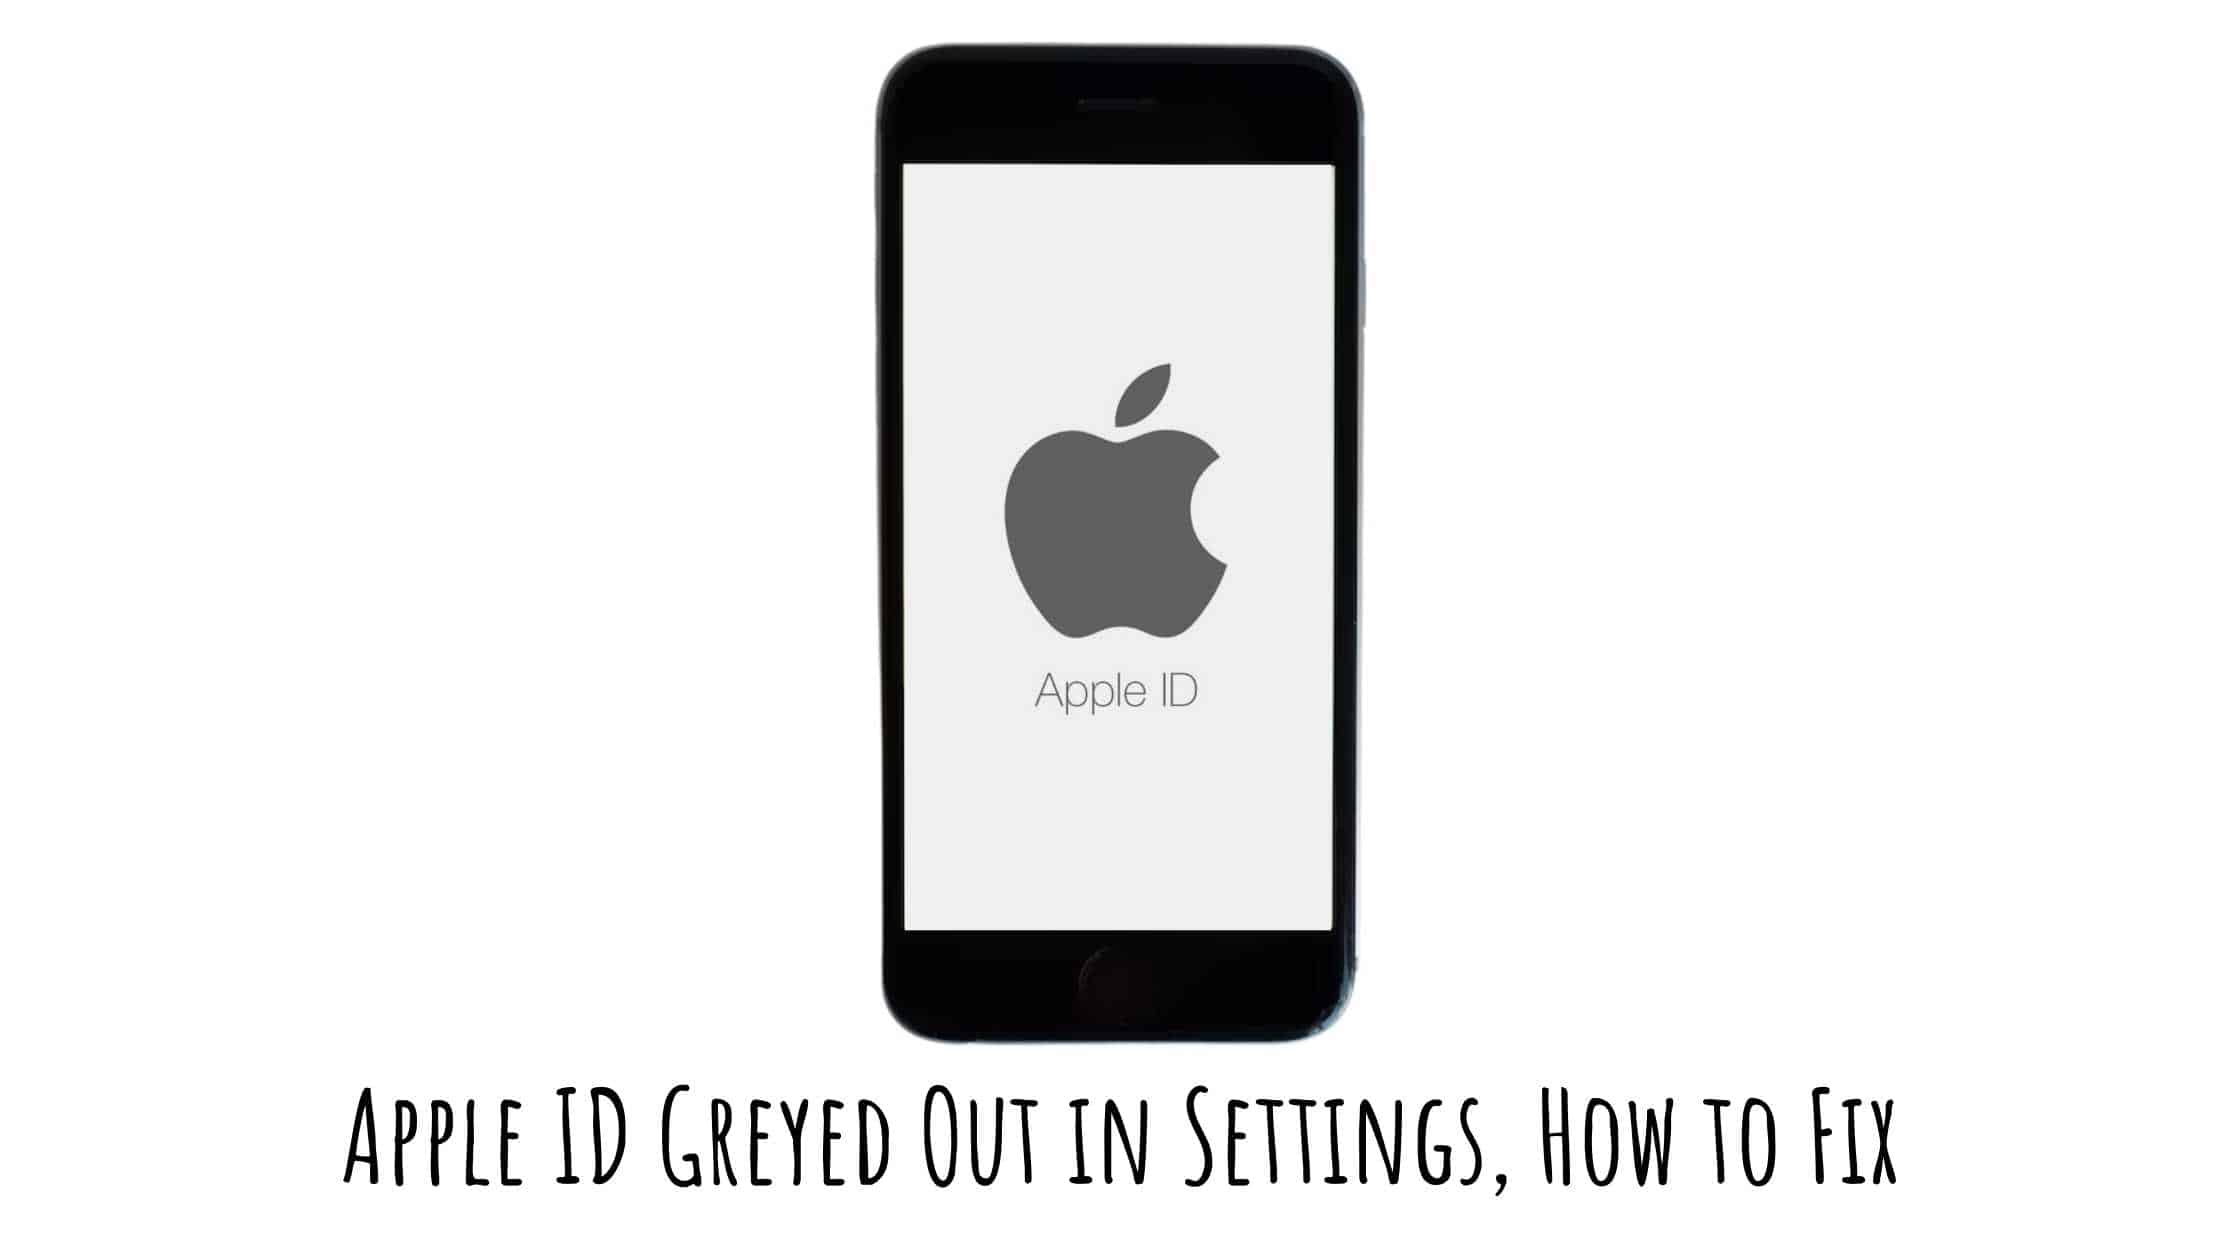 Apple ID Greyed Out in Settings